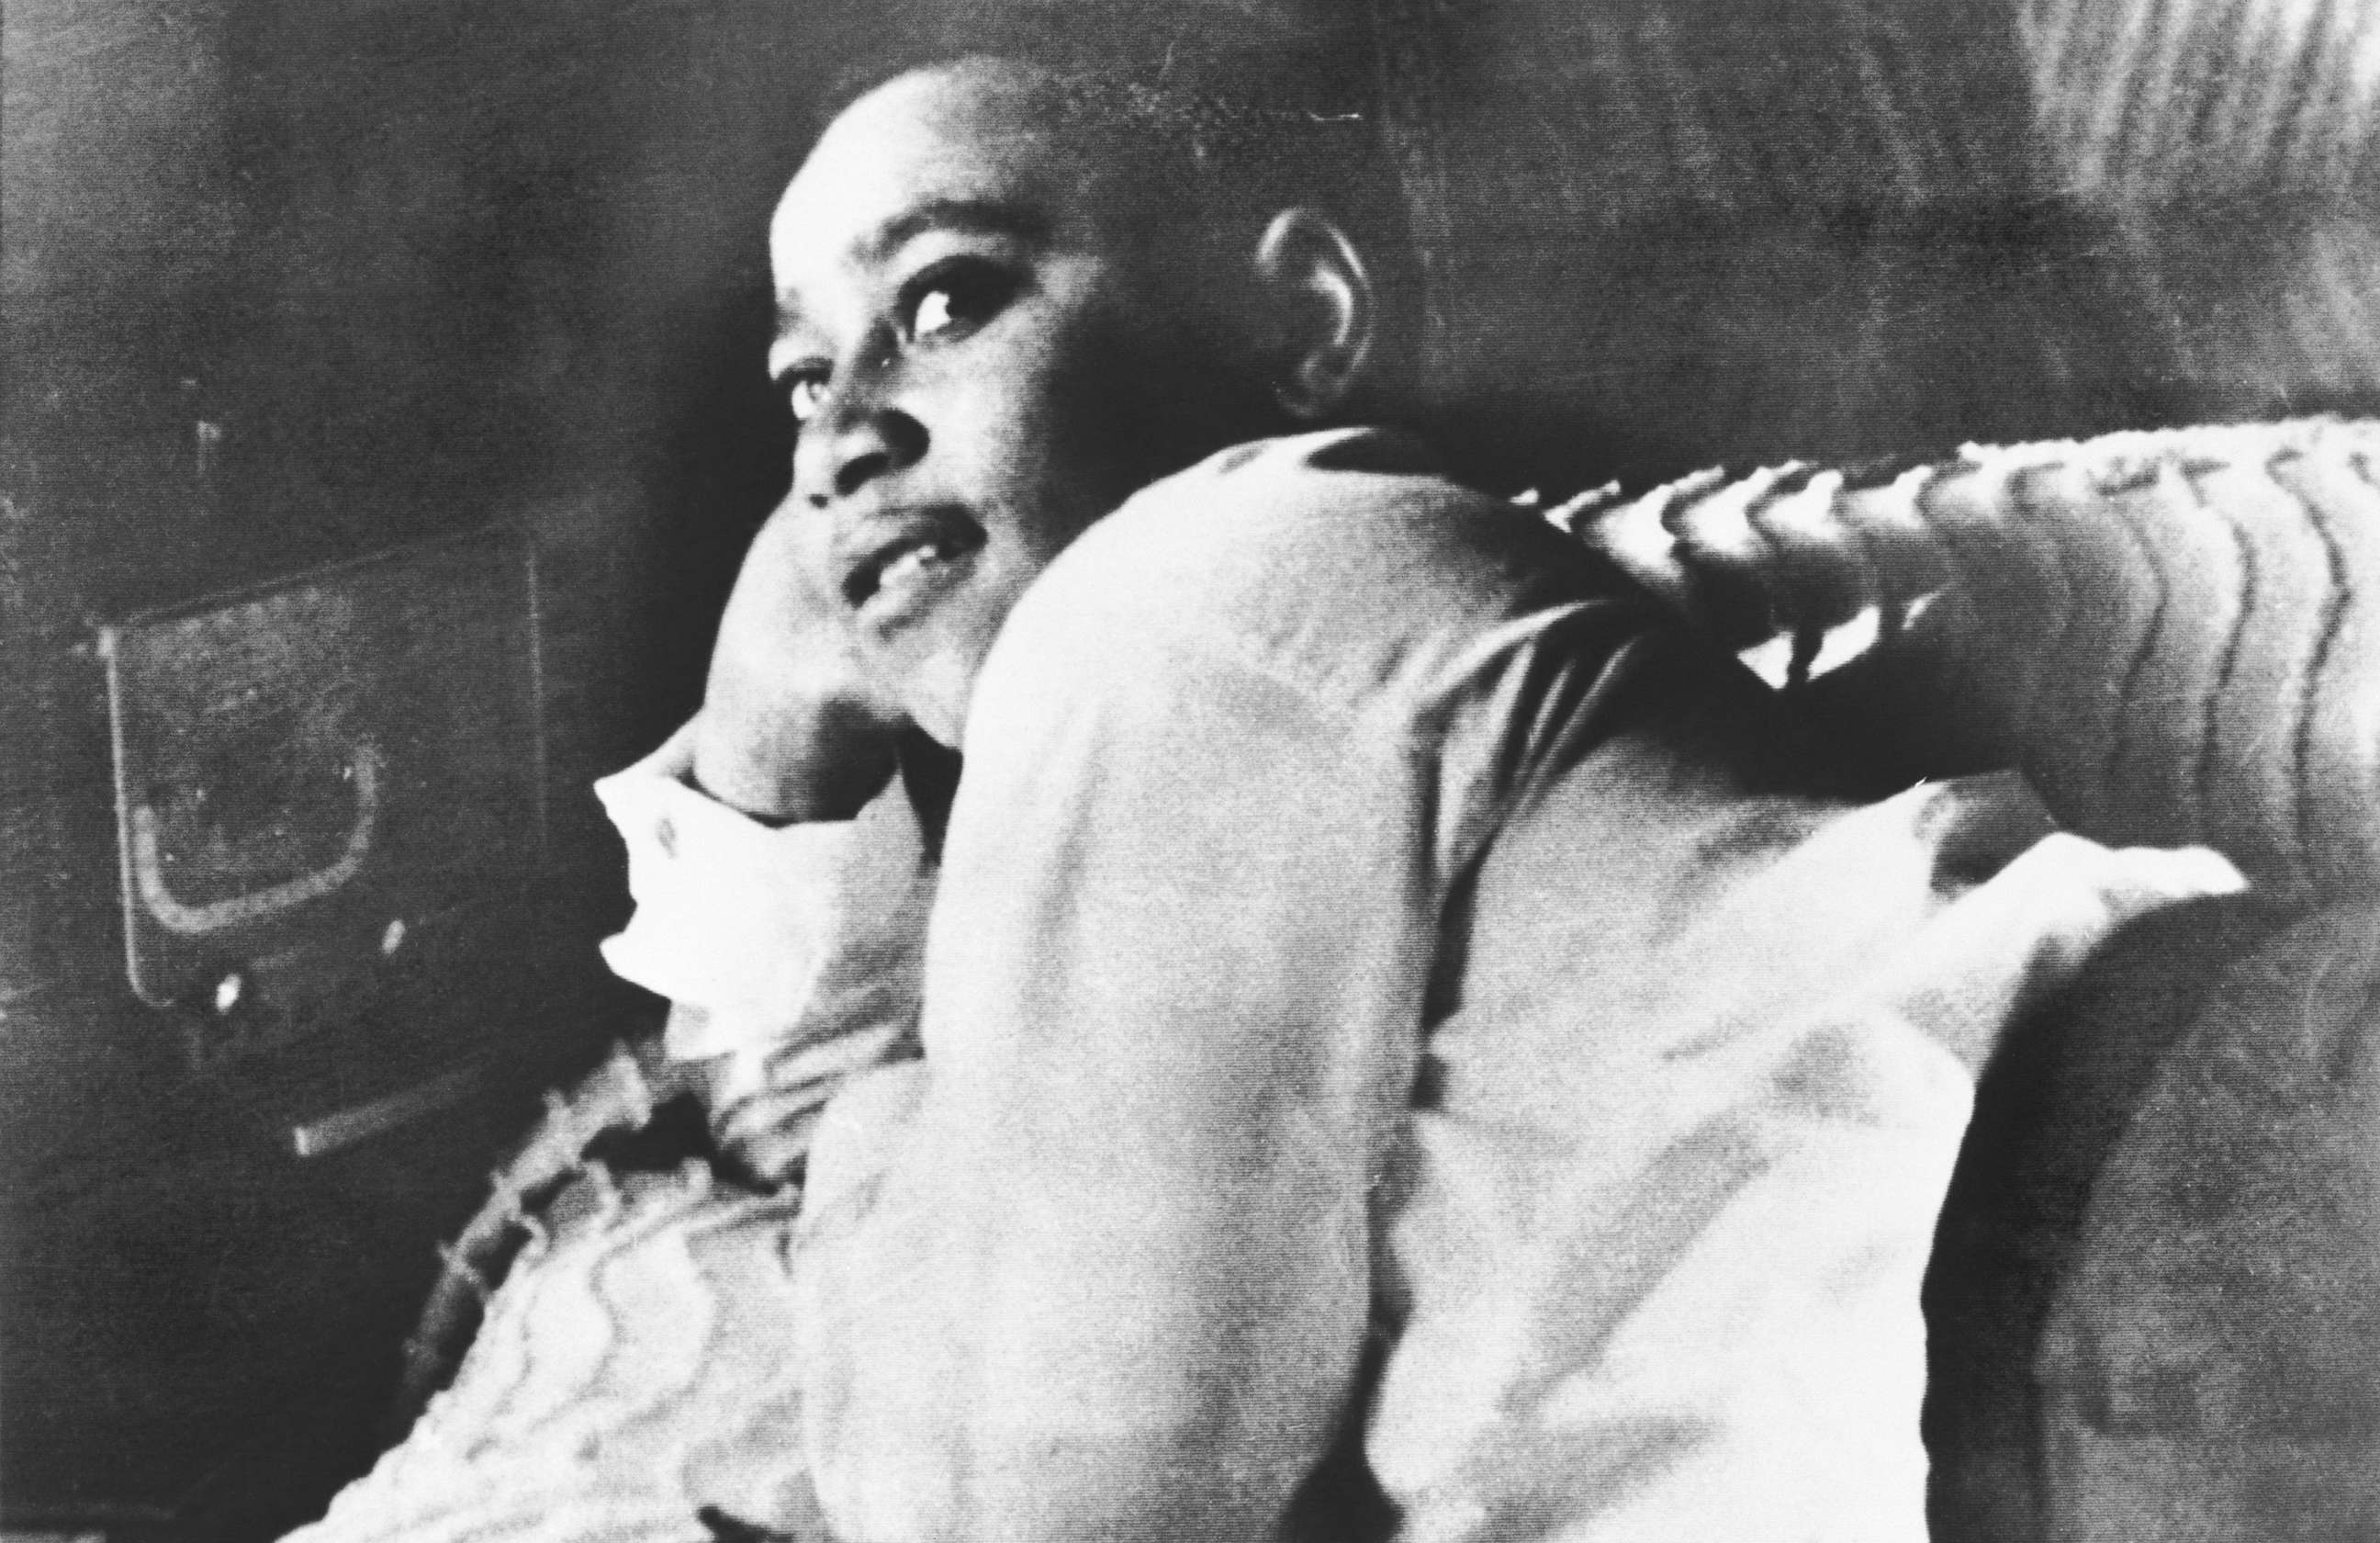 PHOTO: Emmett Till is shown lying on his bed in this undated photo.